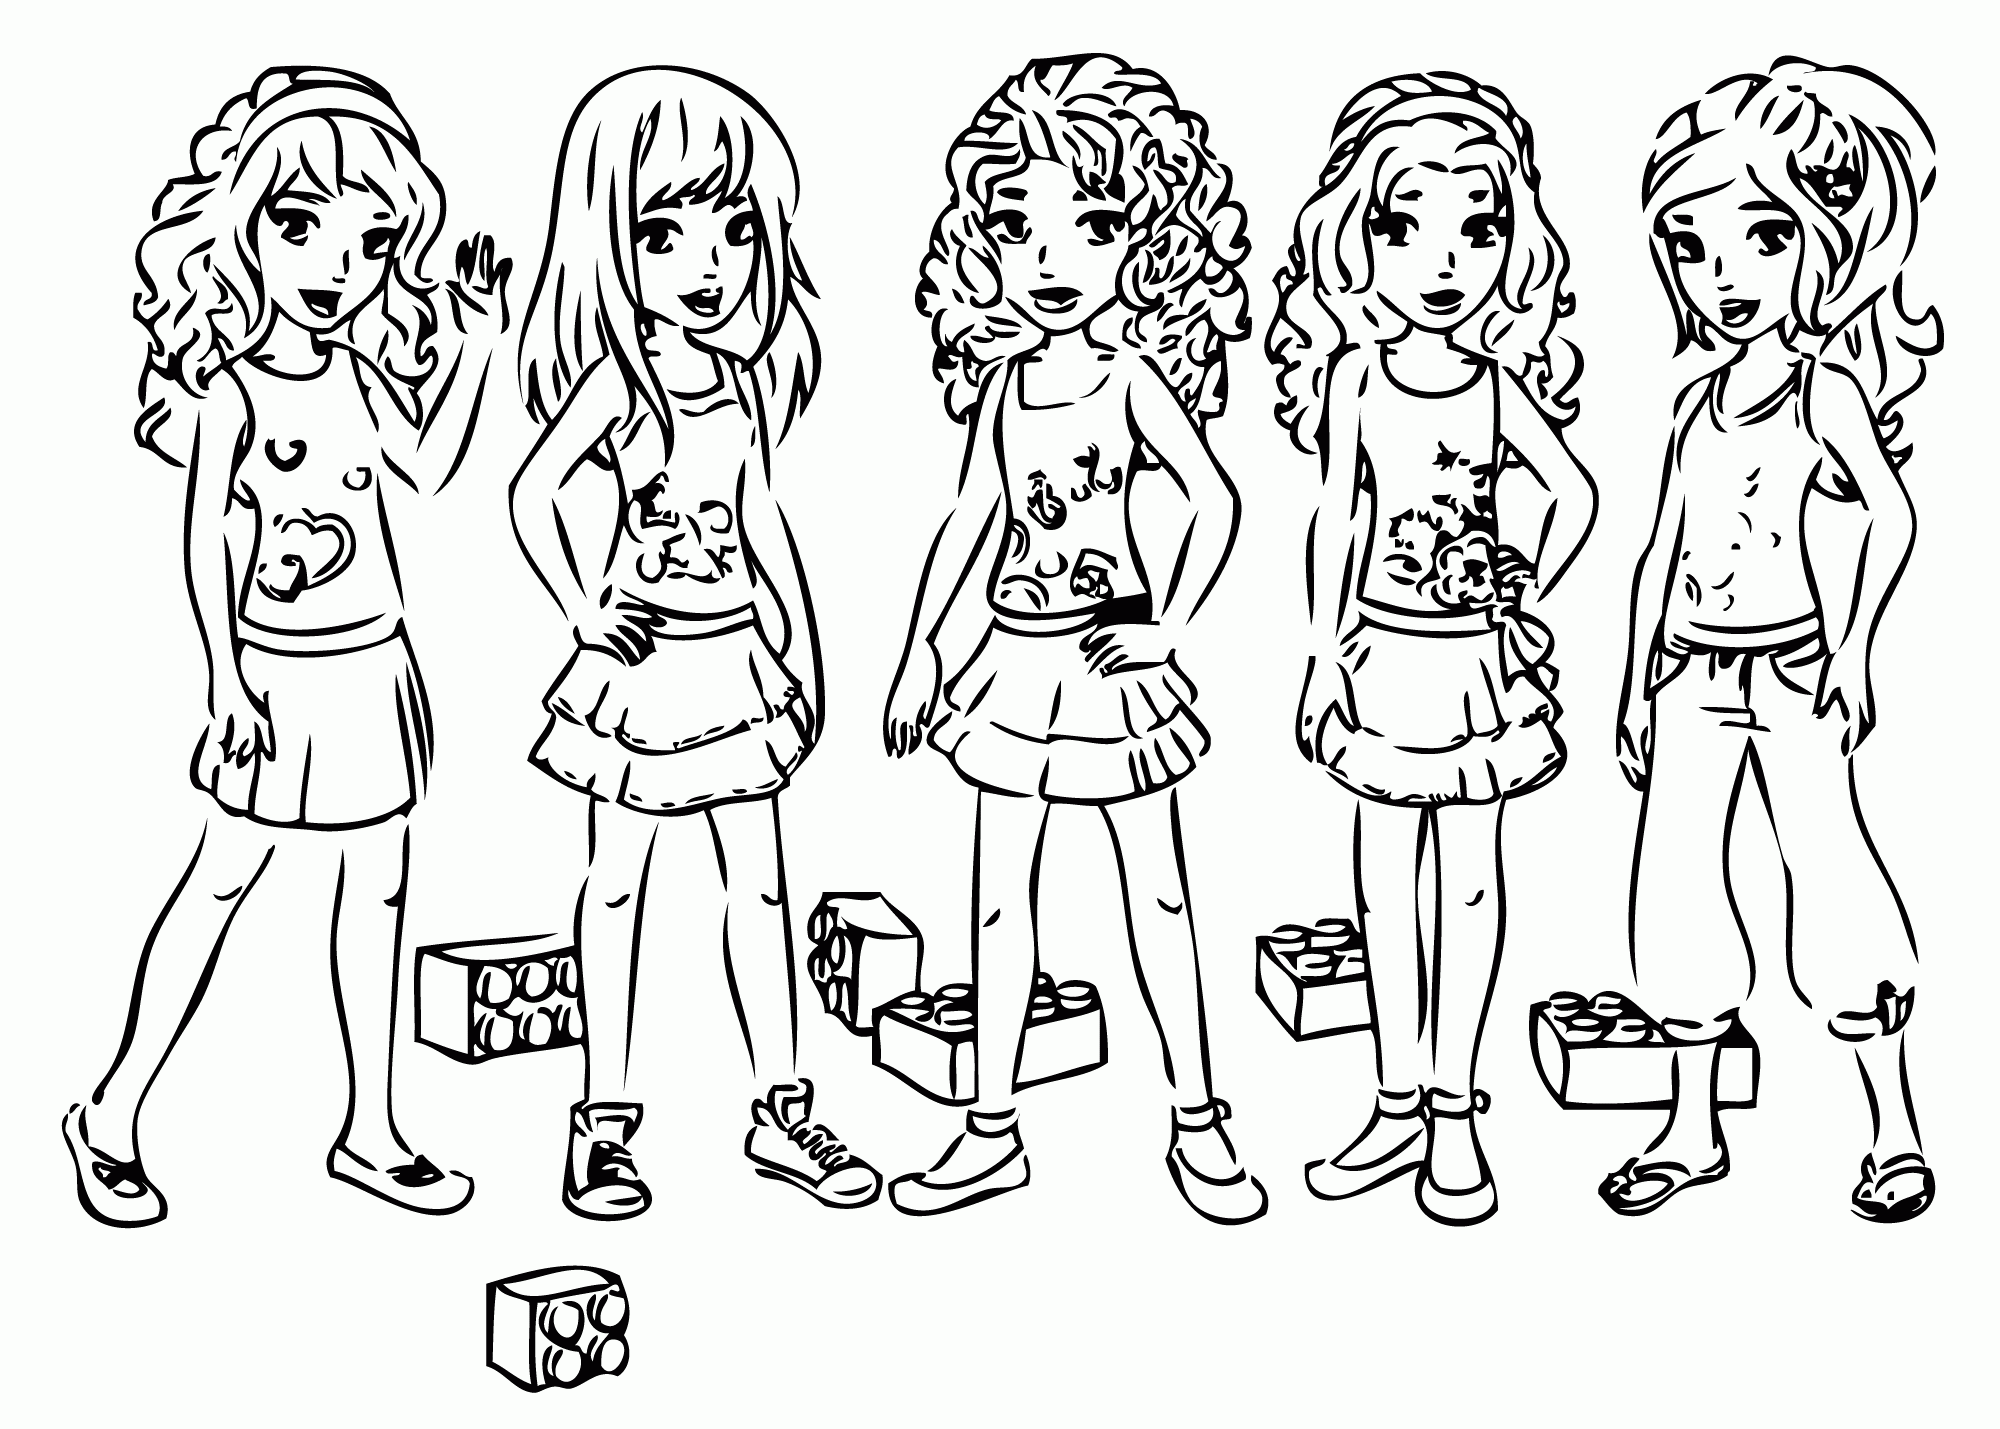 lego friends coloring pages lego friends coloring pages coloring home lego coloring friends pages 